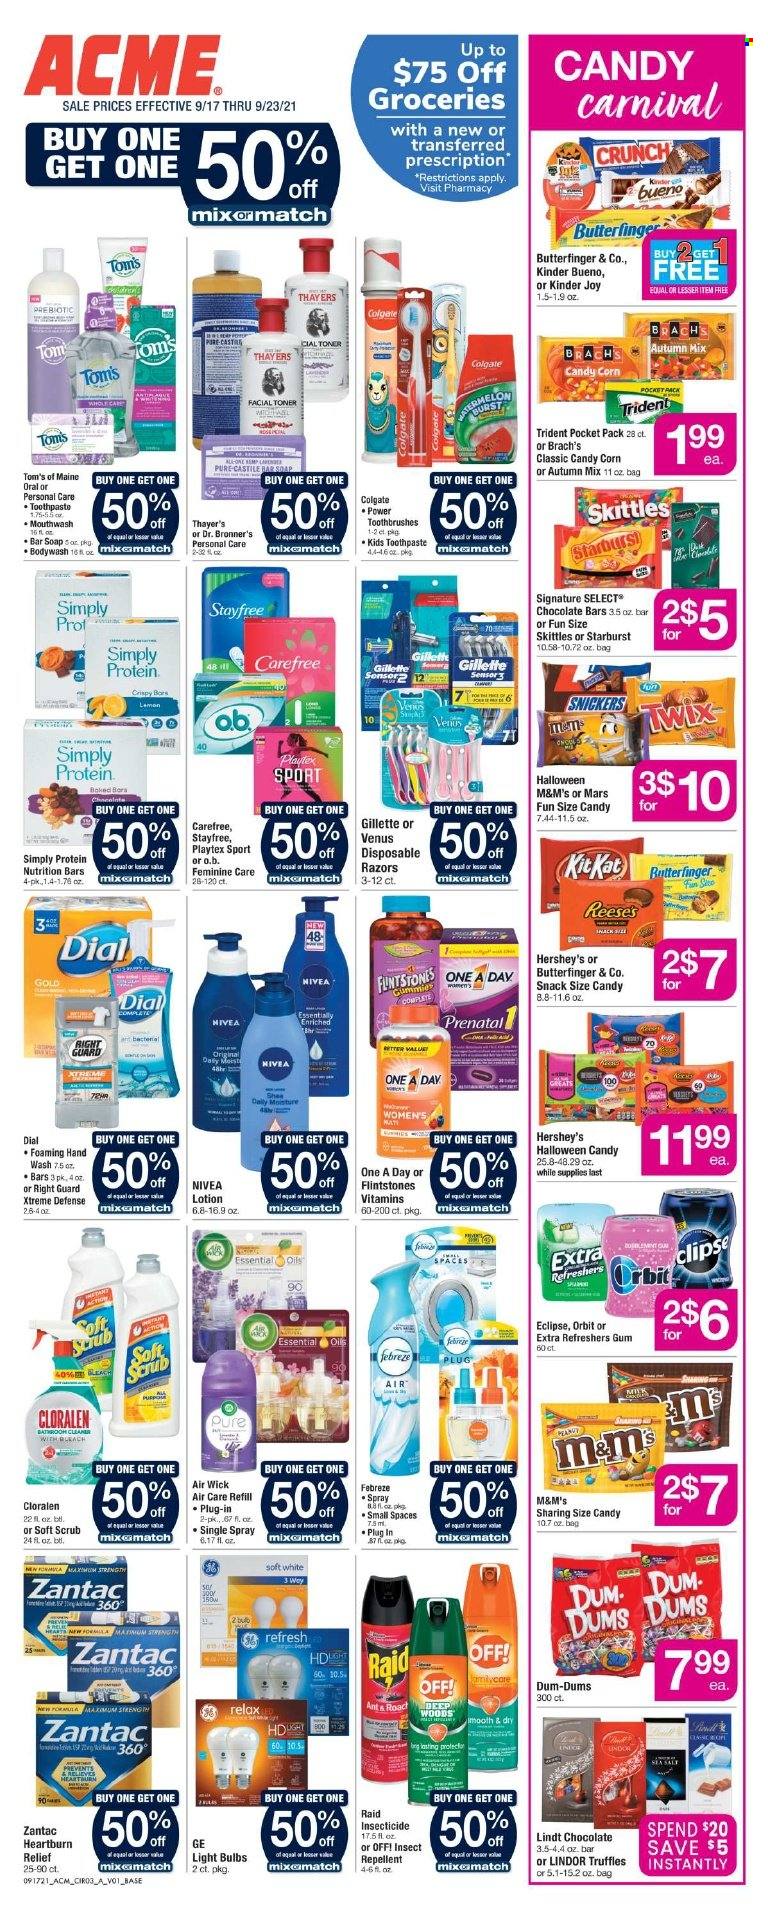 thumbnail - ACME Flyer - 09/17/2021 - 09/23/2021 - Sales products - corn, Reese's, Hershey's, snack, Orbit, Lindt, Lindor, Kinder Joy, Snickers, Twix, Mars, truffles, KitKat, M&M's, Kinder Bueno, Skittles, Trident, Starburst, chocolate bar, nutrition bar, L'Or, Nivea, Febreze, hand wash, soap bar, Dial, soap, Colgate, toothpaste, Stayfree, Playtex, Carefree, body lotion, Gillette, Venus, disposable razor, repellent, insecticide, Raid, Air Wick, bulb, light bulb, Prenatal, Zantac. Page 4.